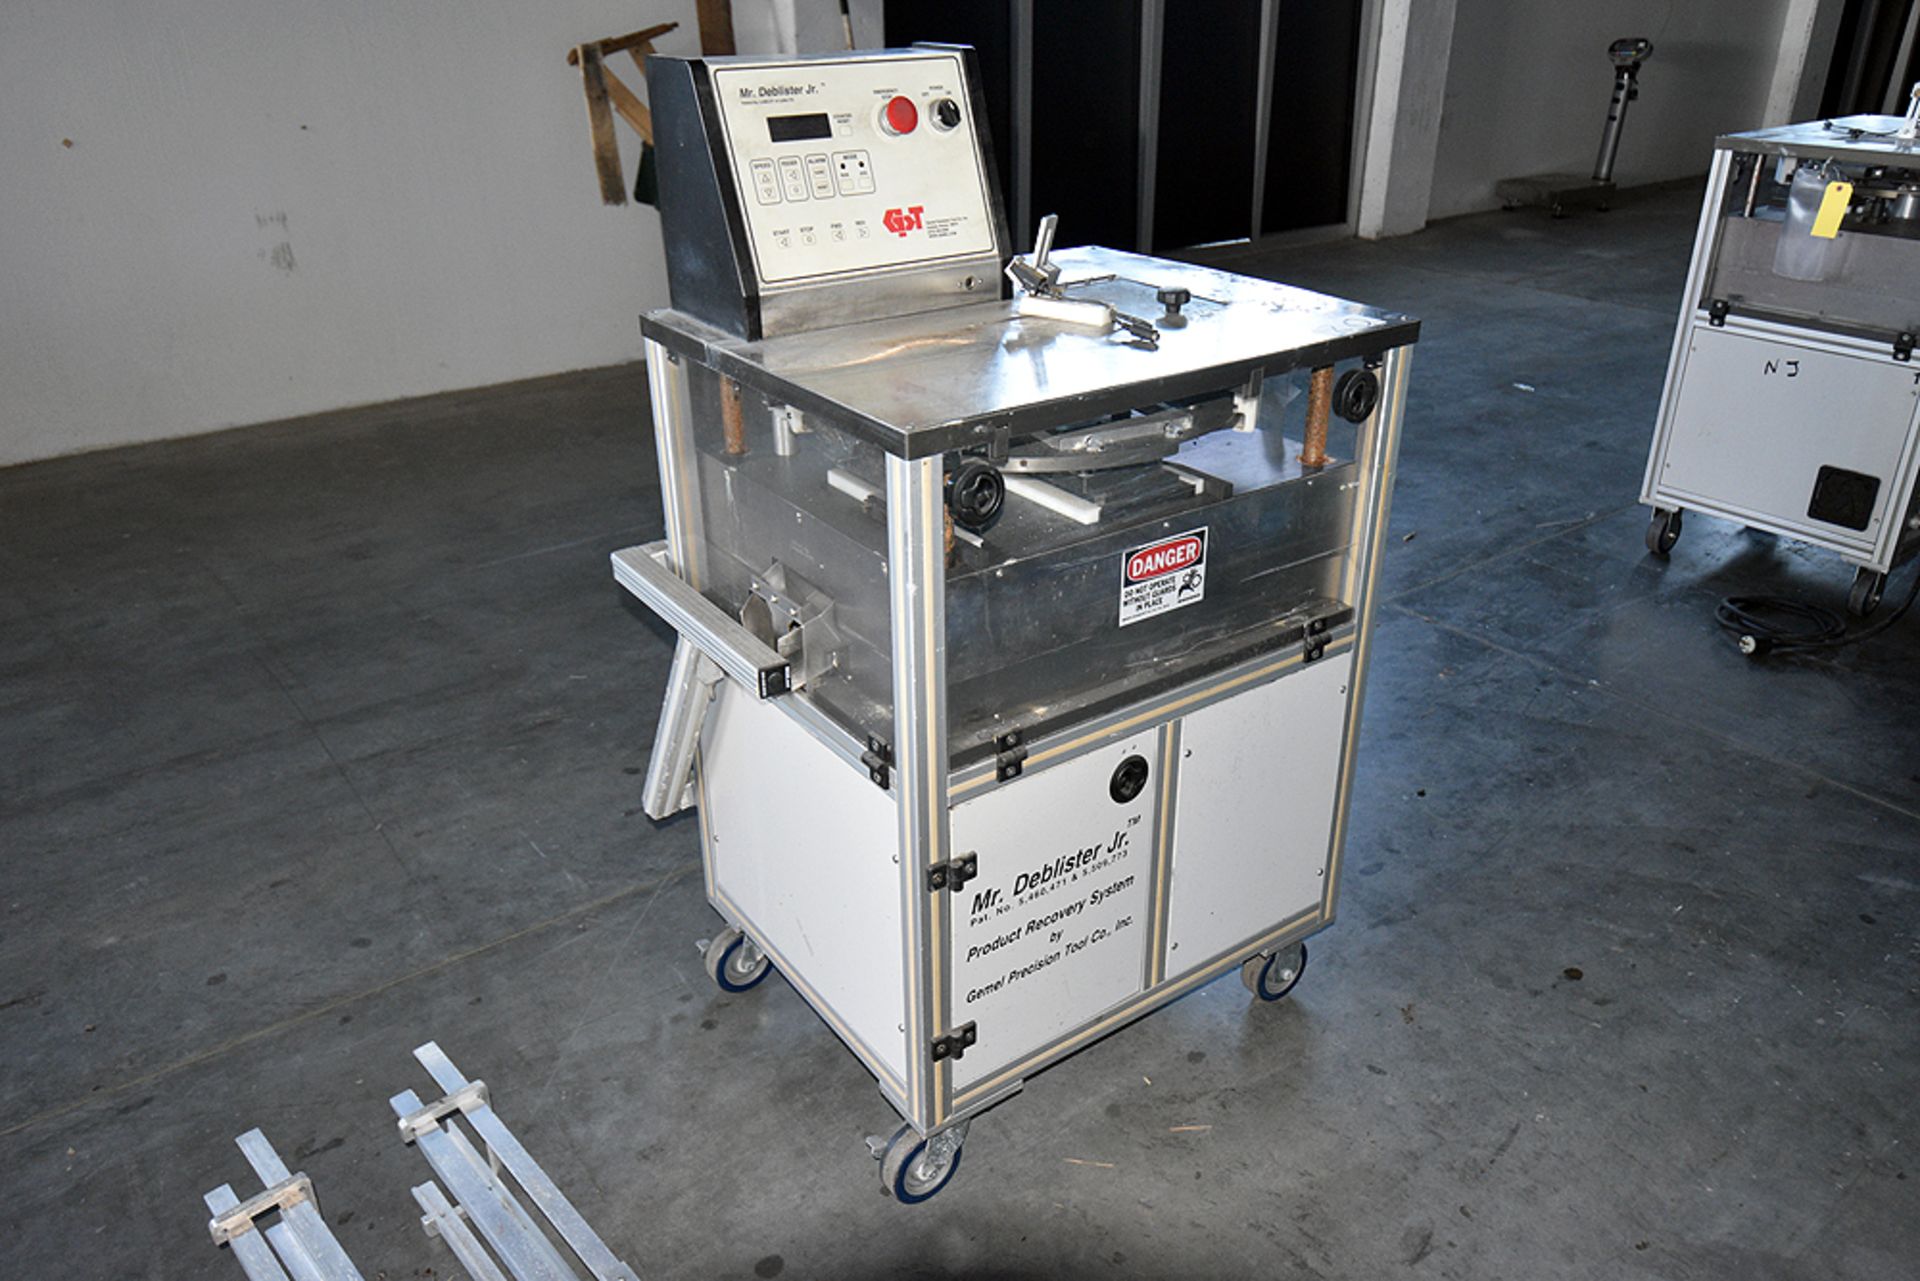 Gemel Precision "Mr. Deblister Jr." Product Recovery System - Image 2 of 10